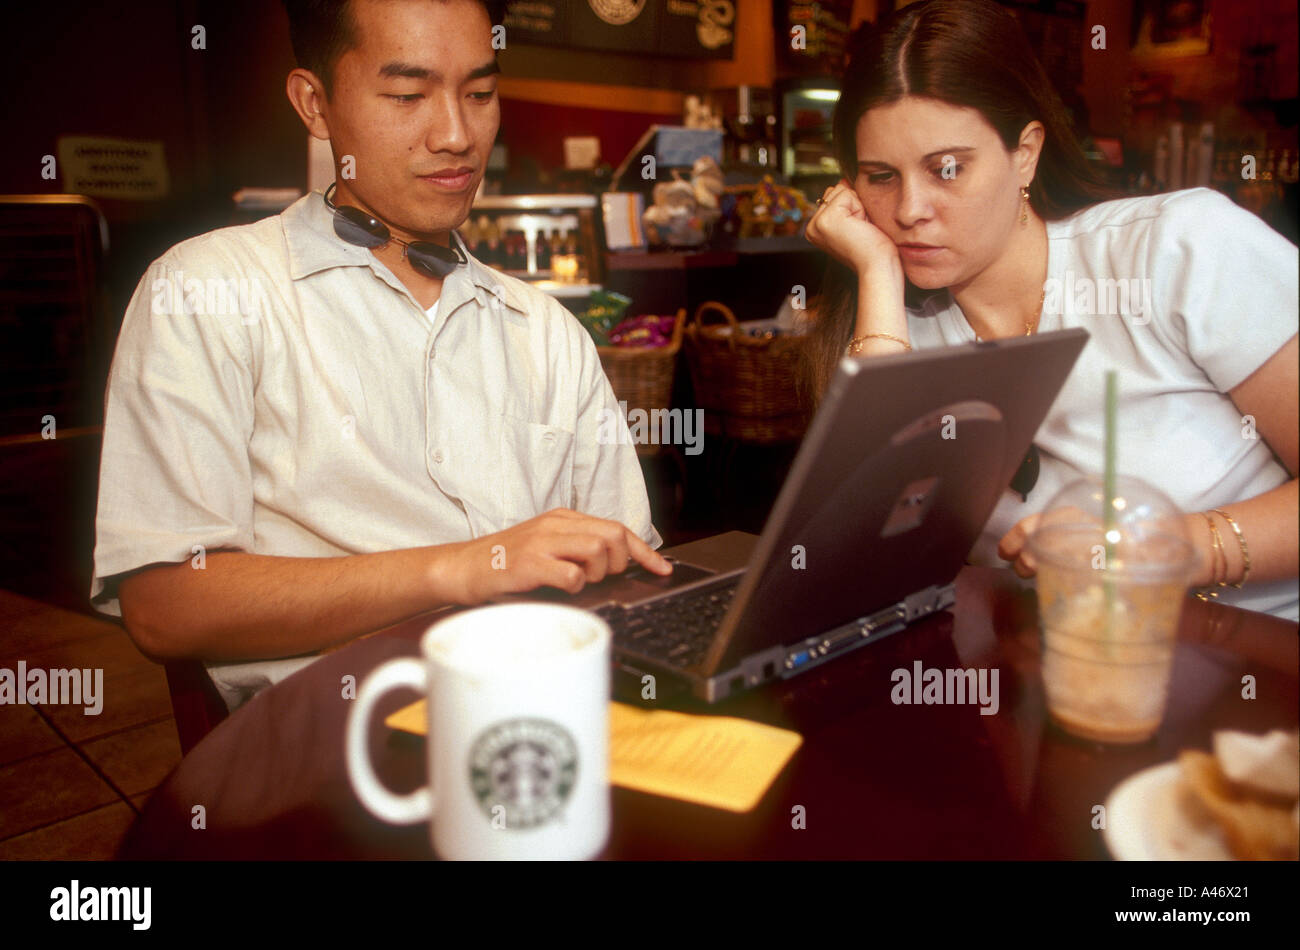 John and Shane Vu from America surf the internet with a laptop at a Starbucks cafe on Old Broad Street in the City of London, UK Stock Photo